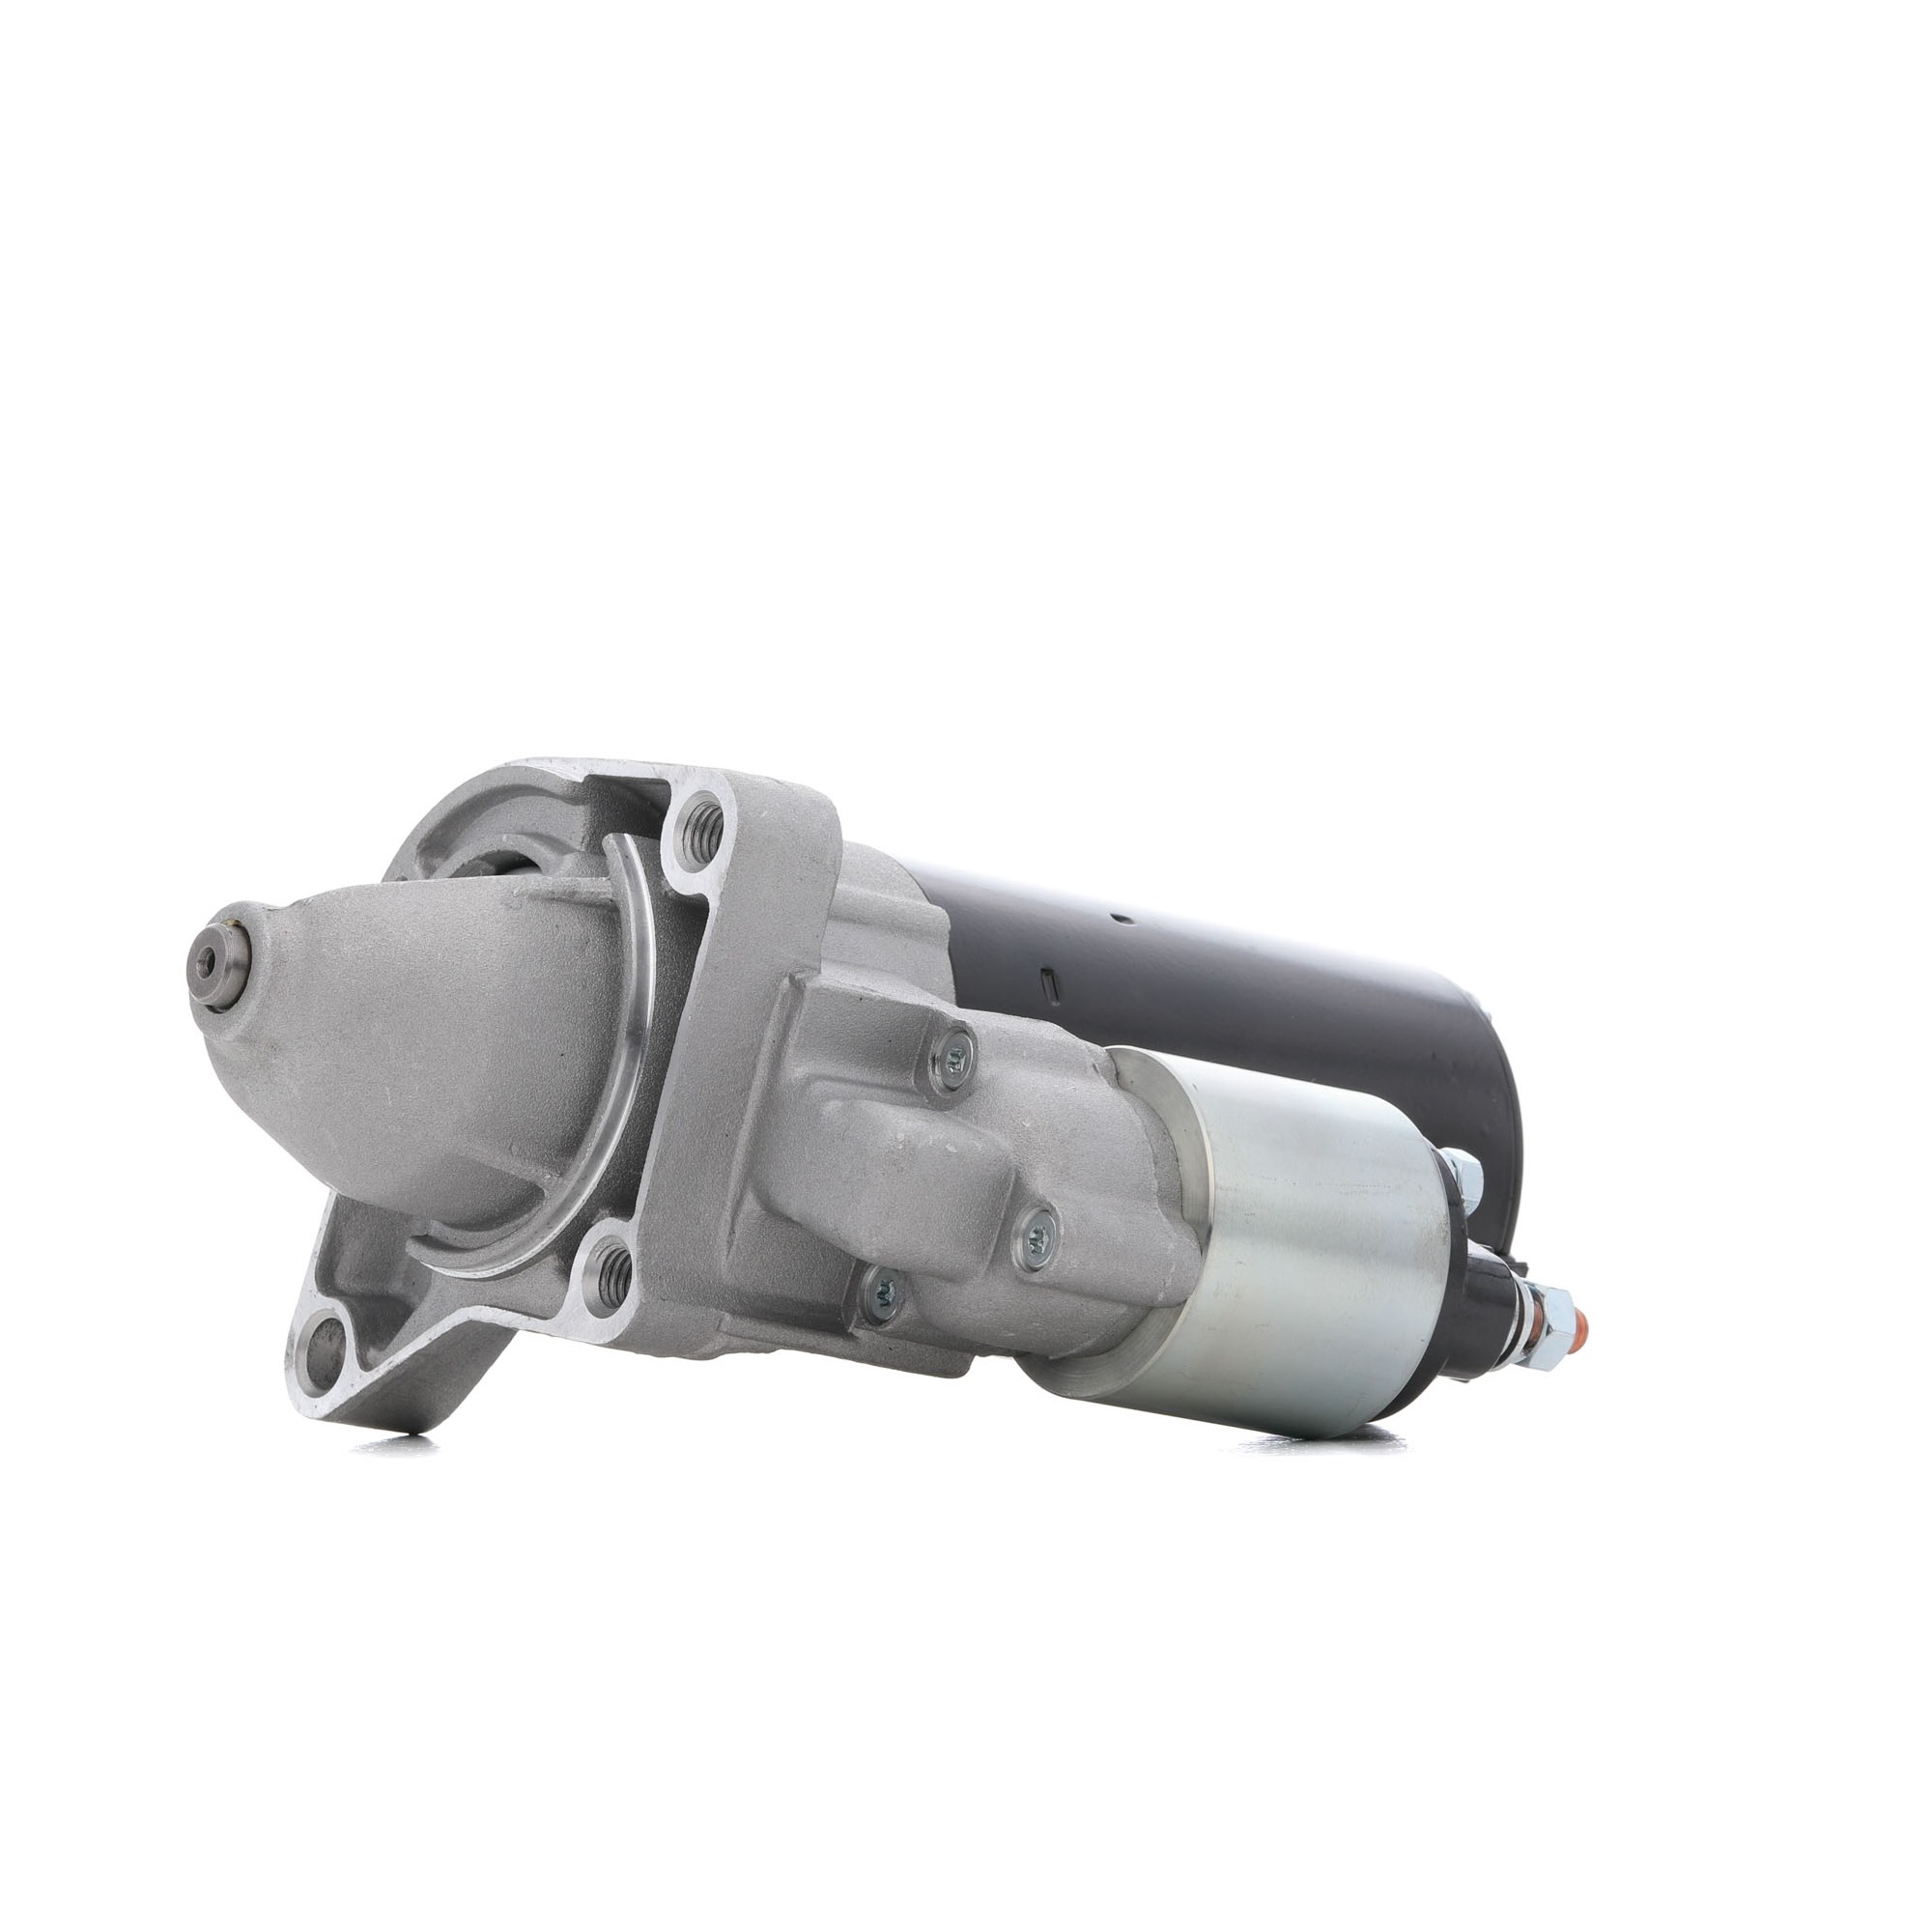 RIDEX 2S0212 Starter motor 12V, 1,4kW, Number of Teeth: 10, with 50(Jet) clamp, M8 B+, re 30, Ø 76 mm